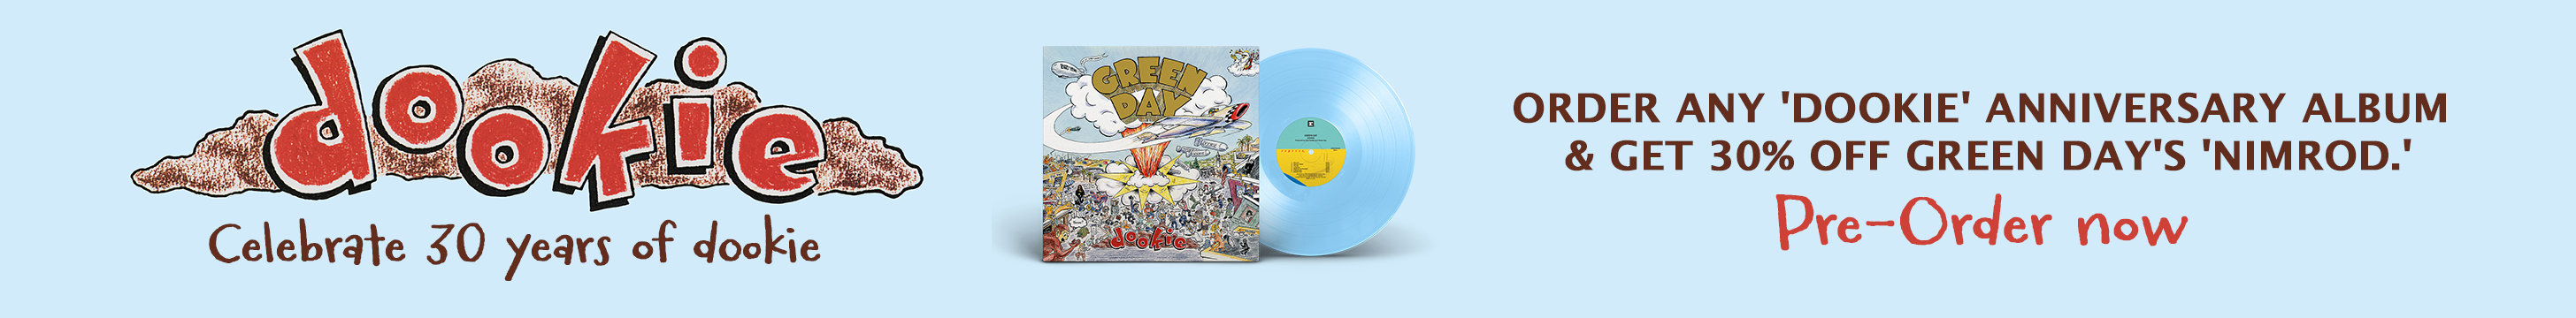 Order any 'Dookie' Anniversary album and get 30% off Green Day's 'Nimrod'